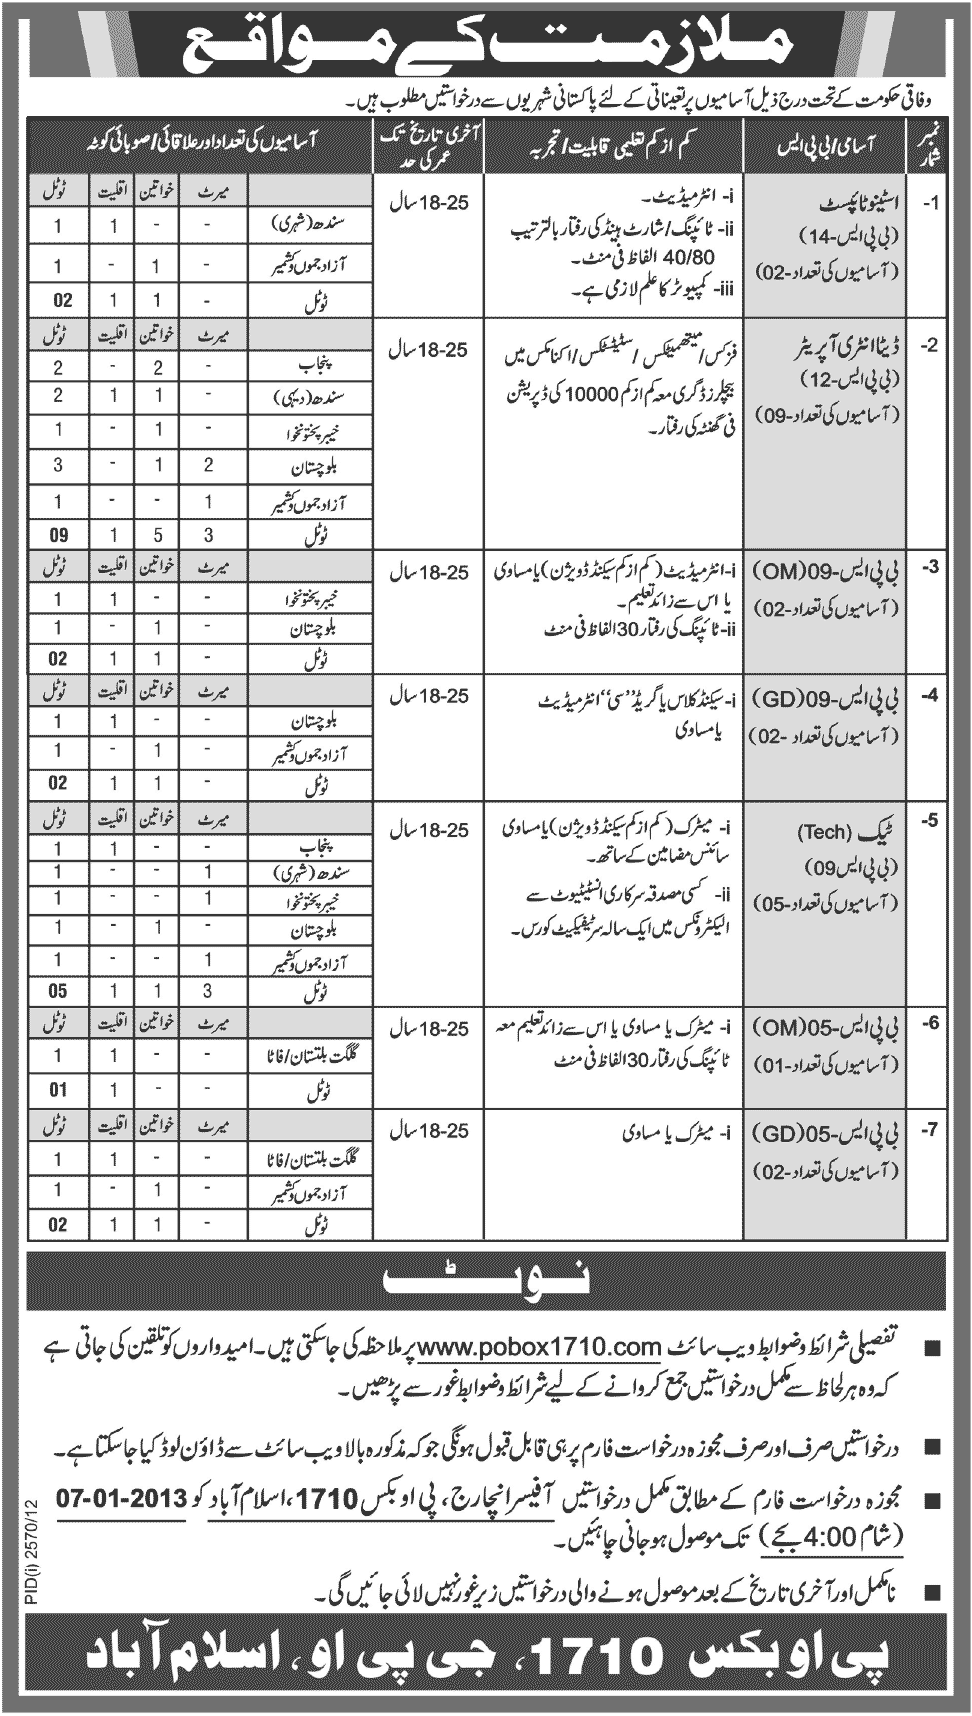 PO Box 1710 GPO Islamabad Jobs Application Form Federal Government